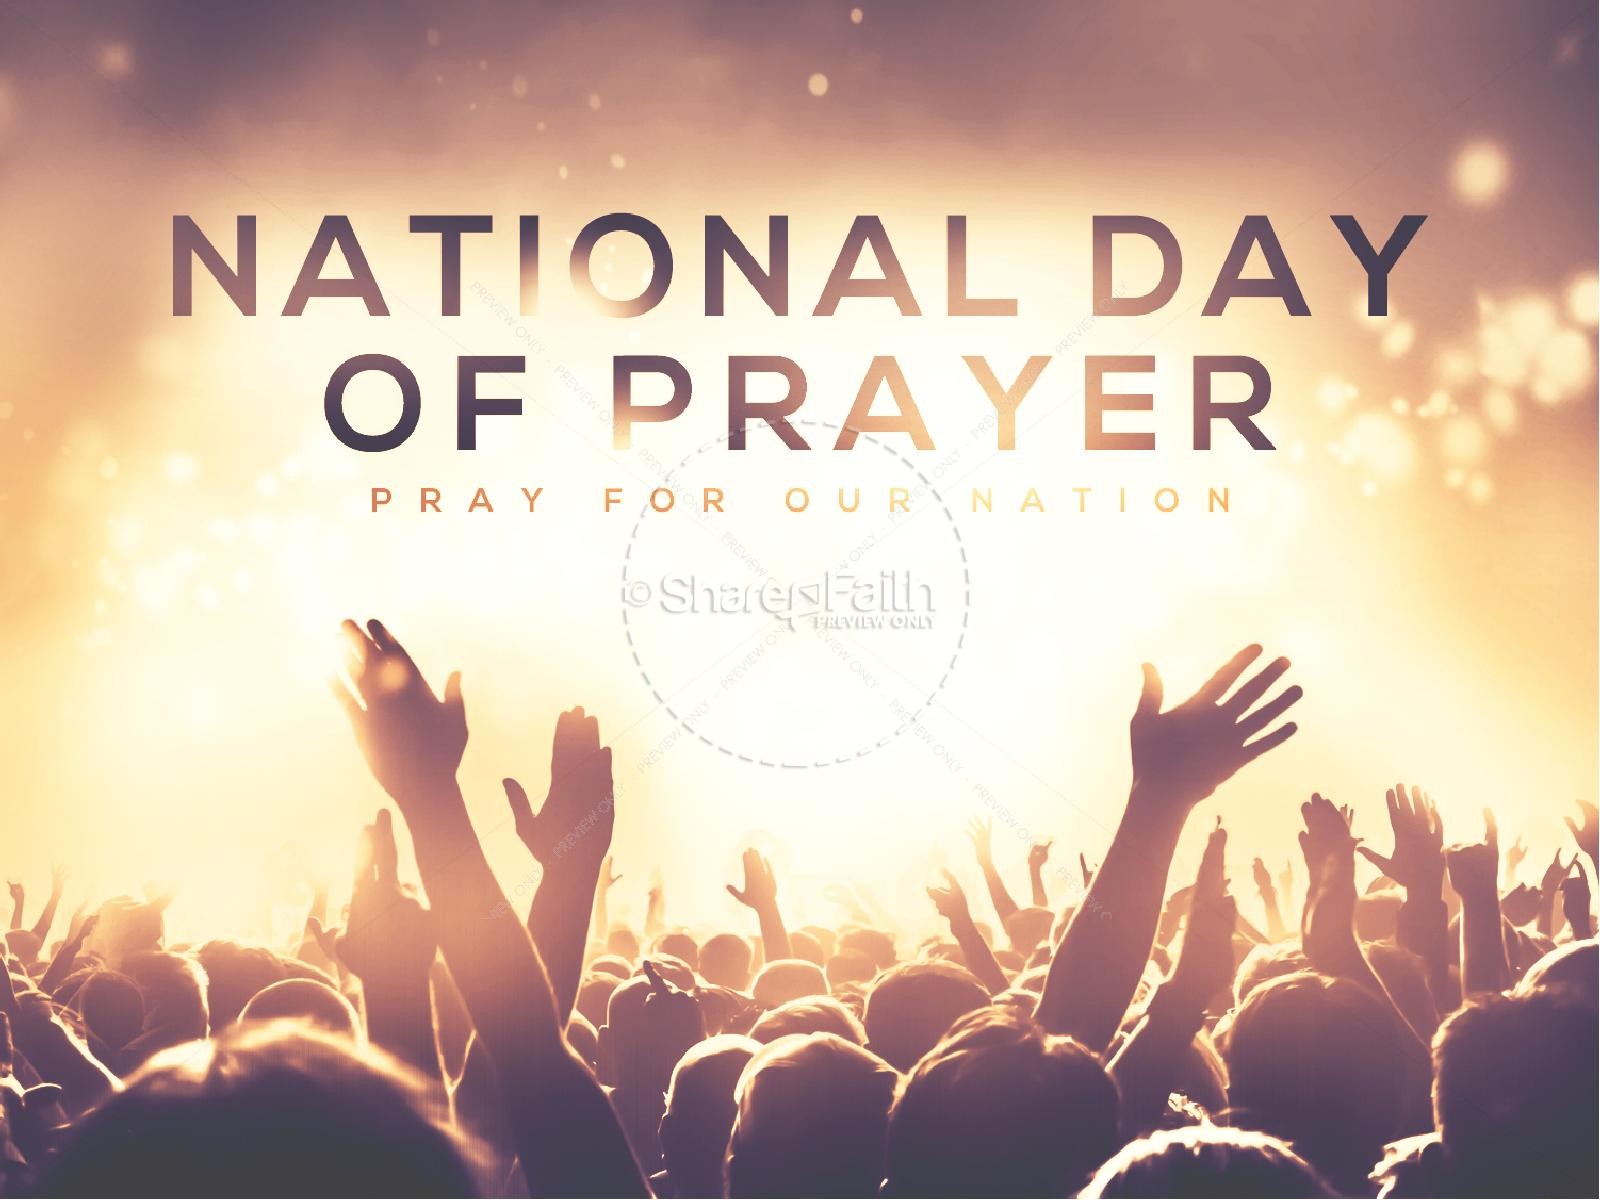 church,congregation,country,gathering,hands,national,national day of prayer,praise,...